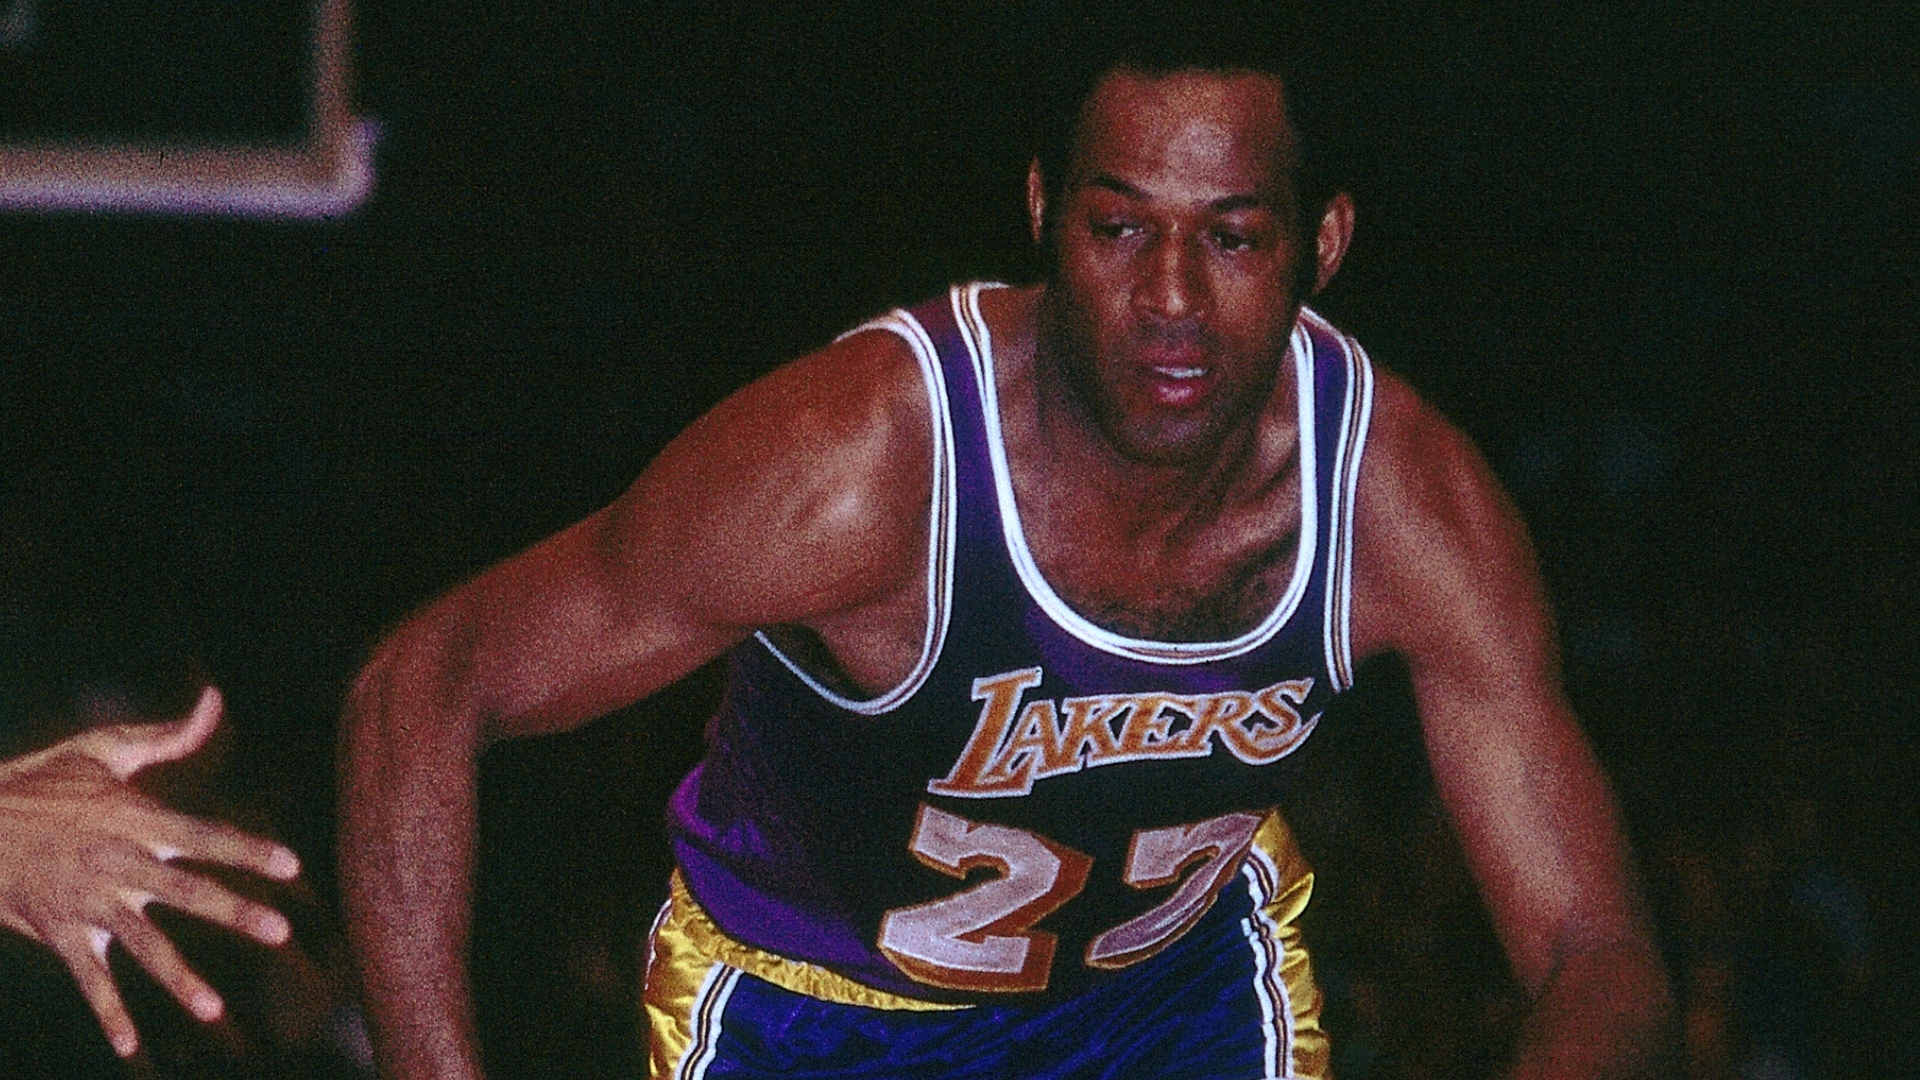 This Date In Nba History Nov 5 Los Angeles Lakers Legend Elgin Baylor Retires After 14 Year Career Nba Com Canada The Official Site Of The Nba